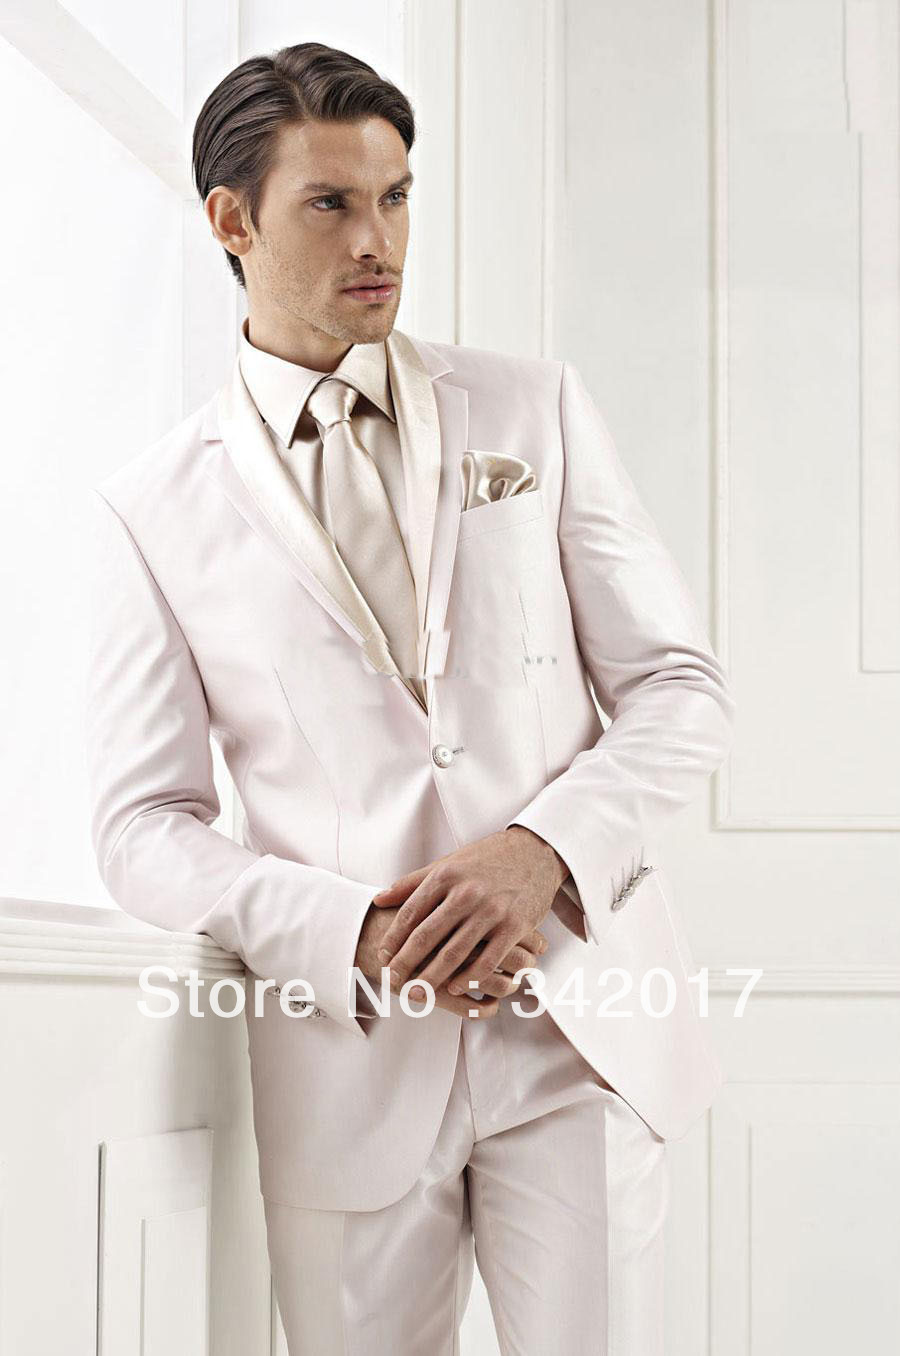 ... Gold Line Groom Tuxedos Suits For Wedding Evening Formal Men Suit